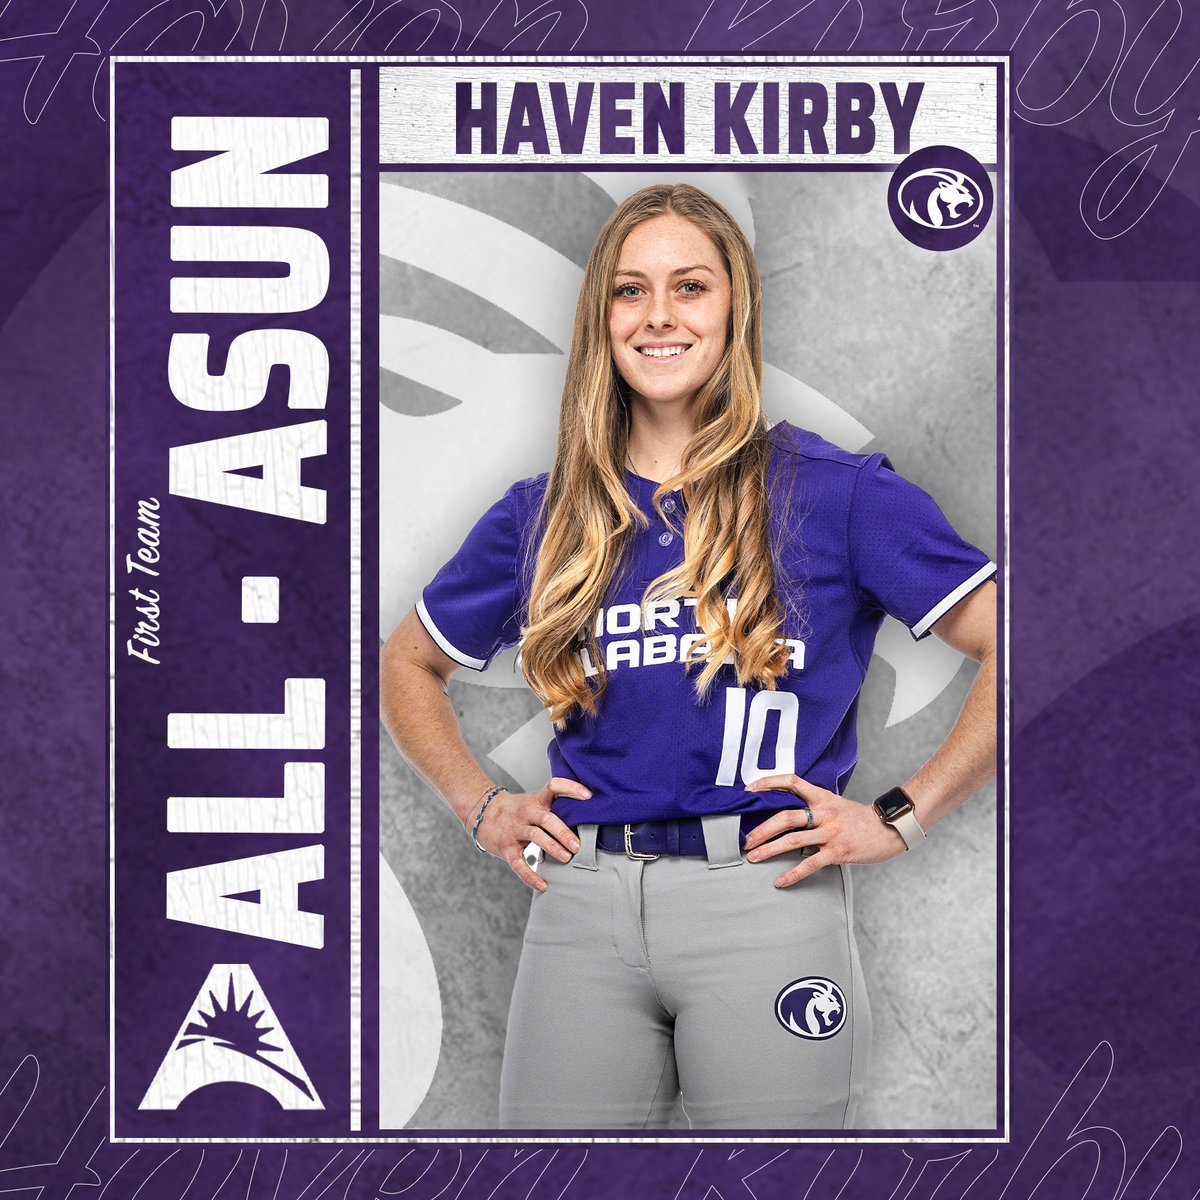 🏆 𝗙𝗜𝗥𝗦𝗧 𝗧𝗘𝗔𝗠 𝗔𝗟𝗟-𝗔𝗦𝗨𝗡 🏆 Congrats to junior pitcher Alivia Wilken and senior shortstop Haven Kirby on landing first team all-conference honors for the first time! Wilken and Kirby combined for three ASUN weekly awards this season! #RaiseTheROAR | #RoarLions 🦁